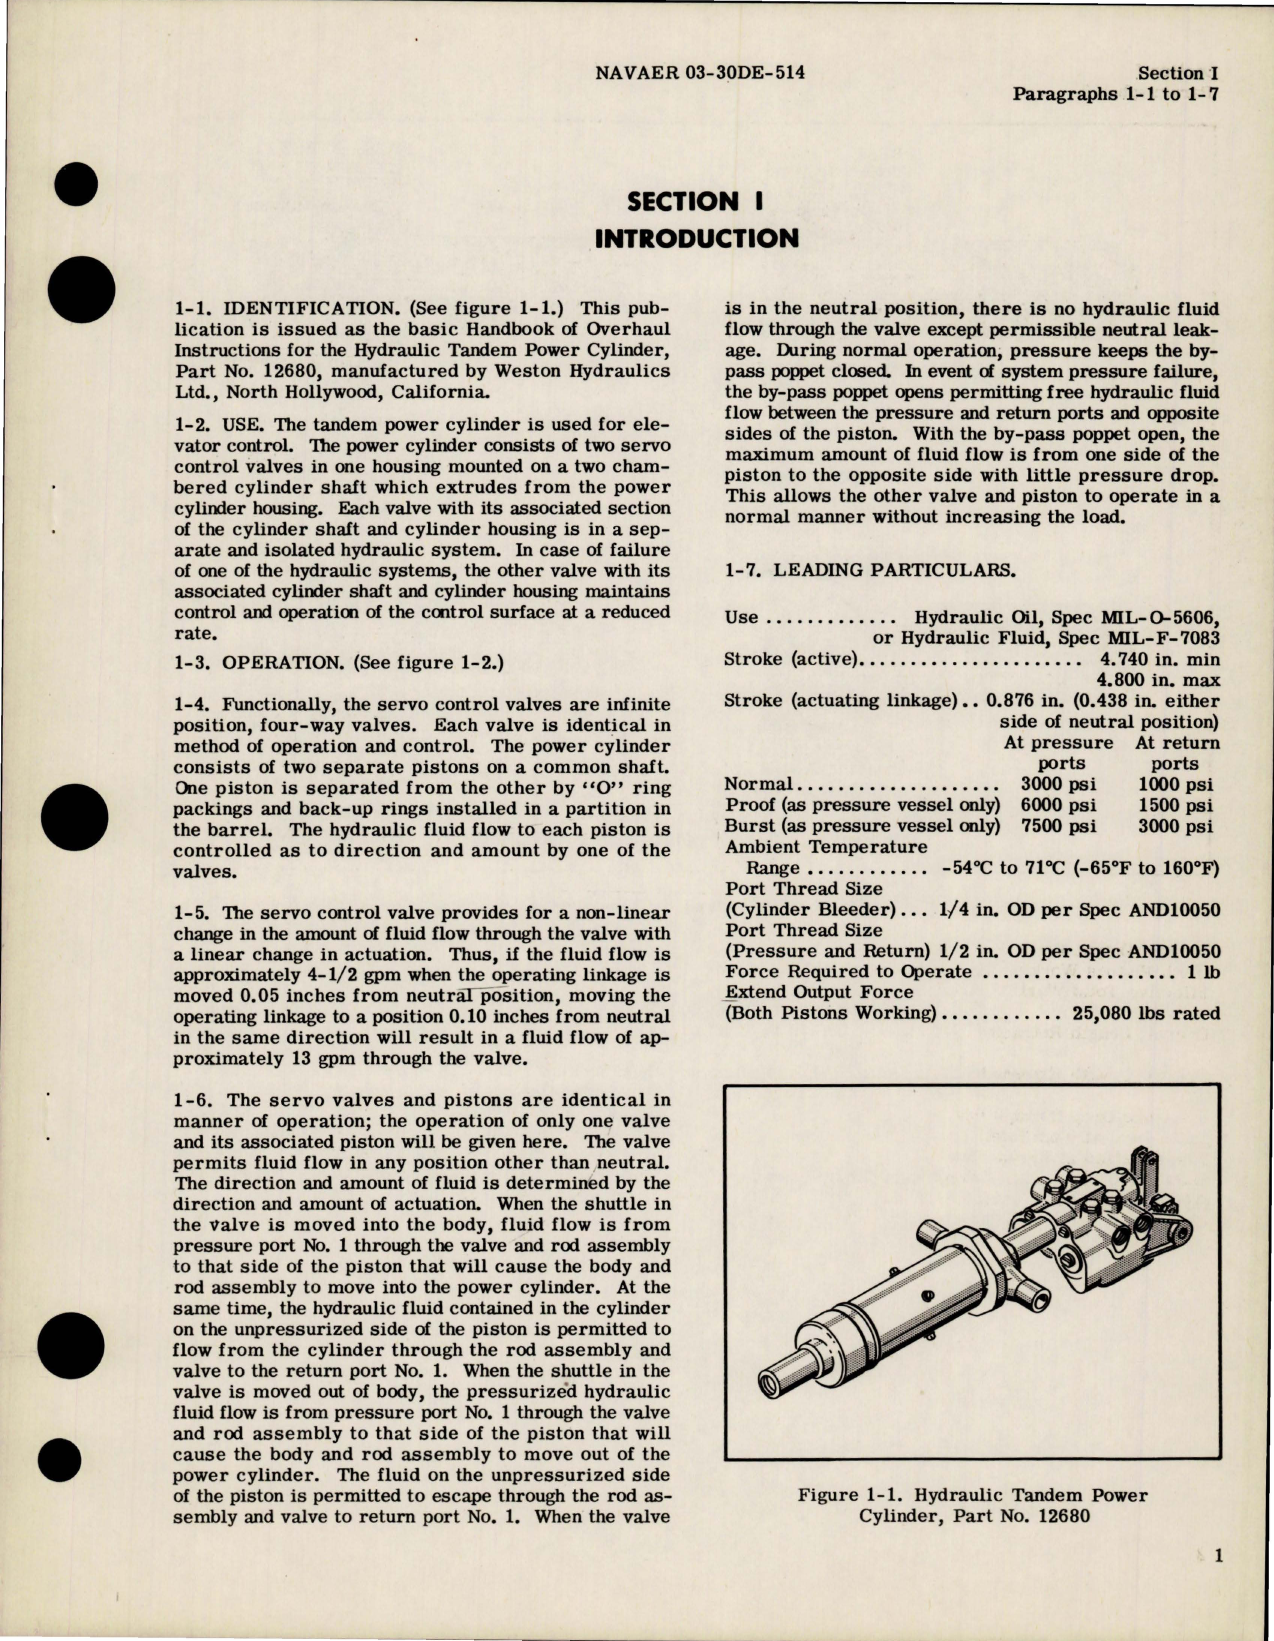 Sample page 5 from AirCorps Library document: Overhaul Instructions for Hydraulic Tandem Power Cylinder - Part 12680 